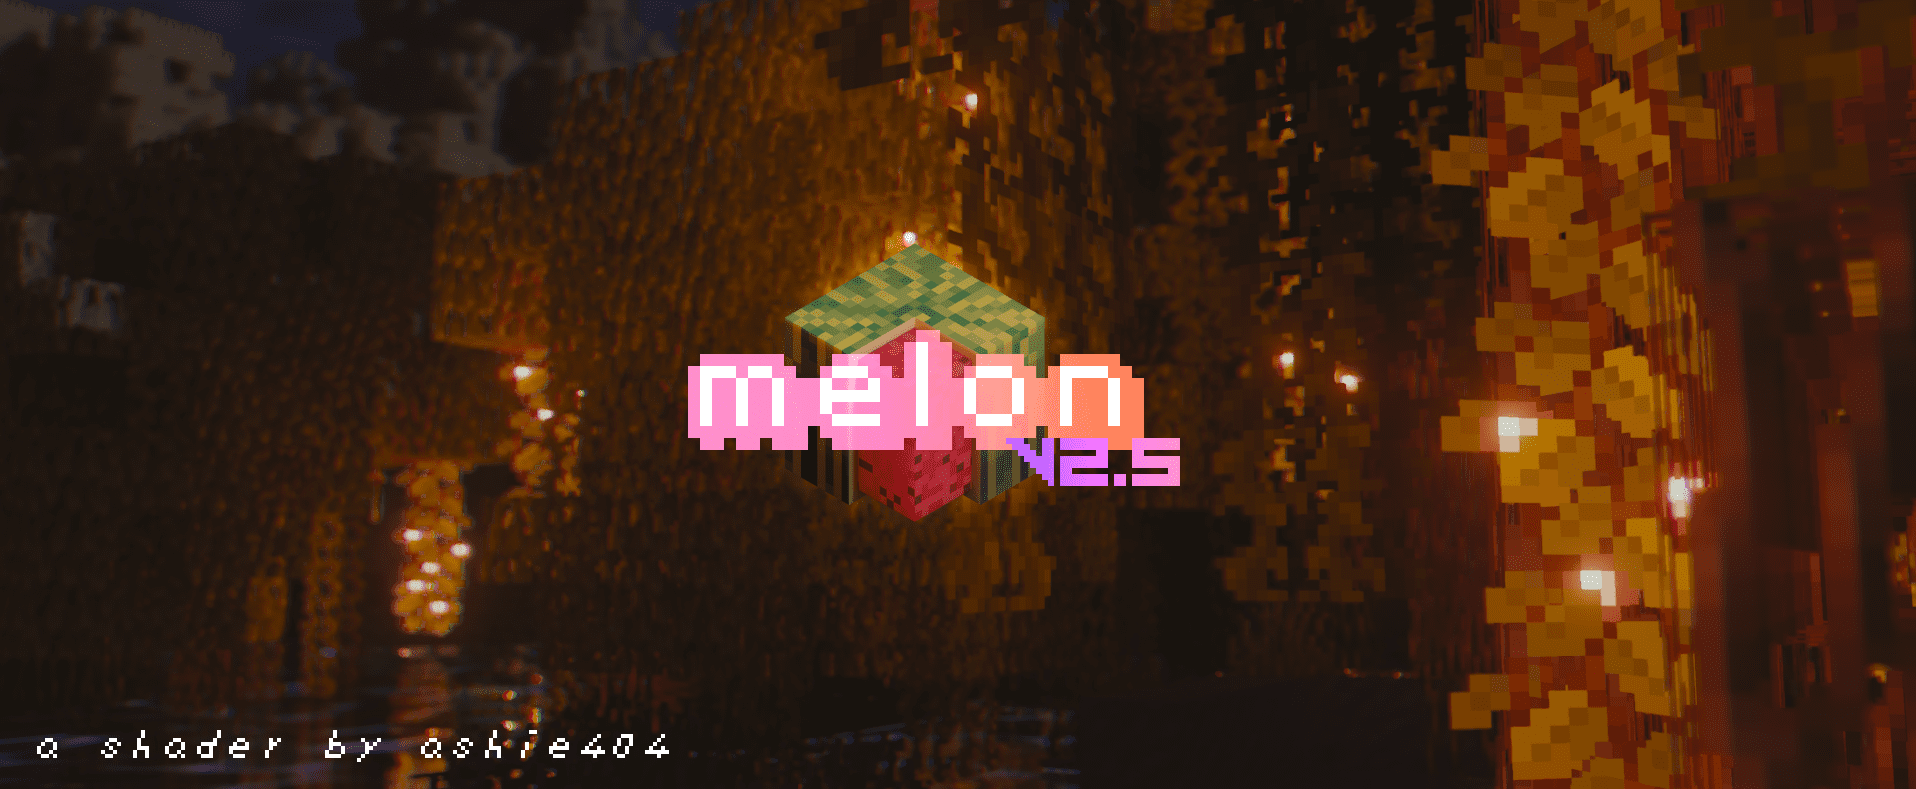 Melon Shaders (1.21, 1.20.1) - Based on BSL, Raspberry Shaders 1